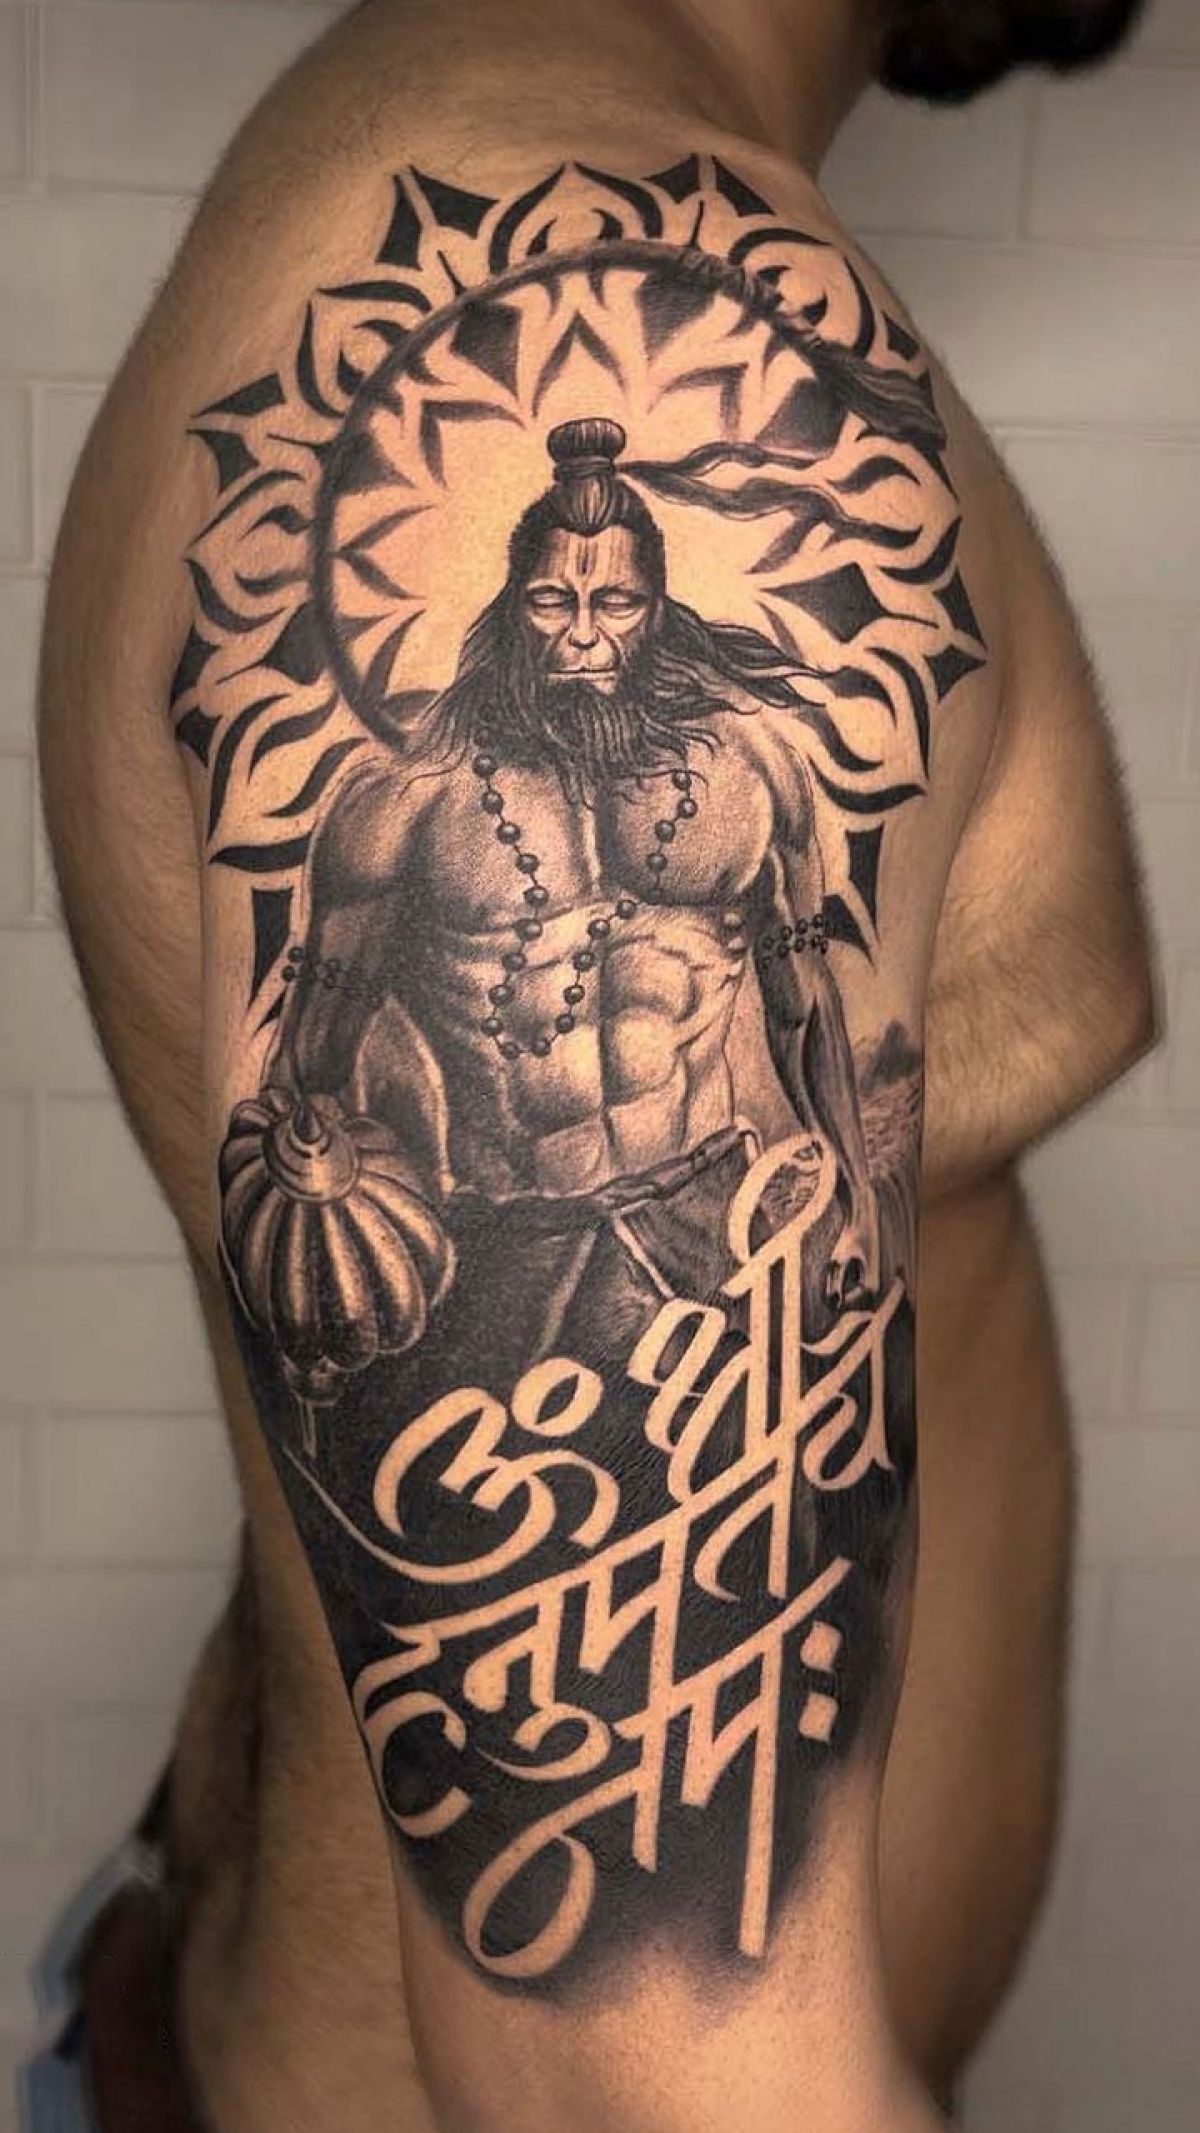 Share 78 about angry bajrangbali tattoo super cool  indaotaonec